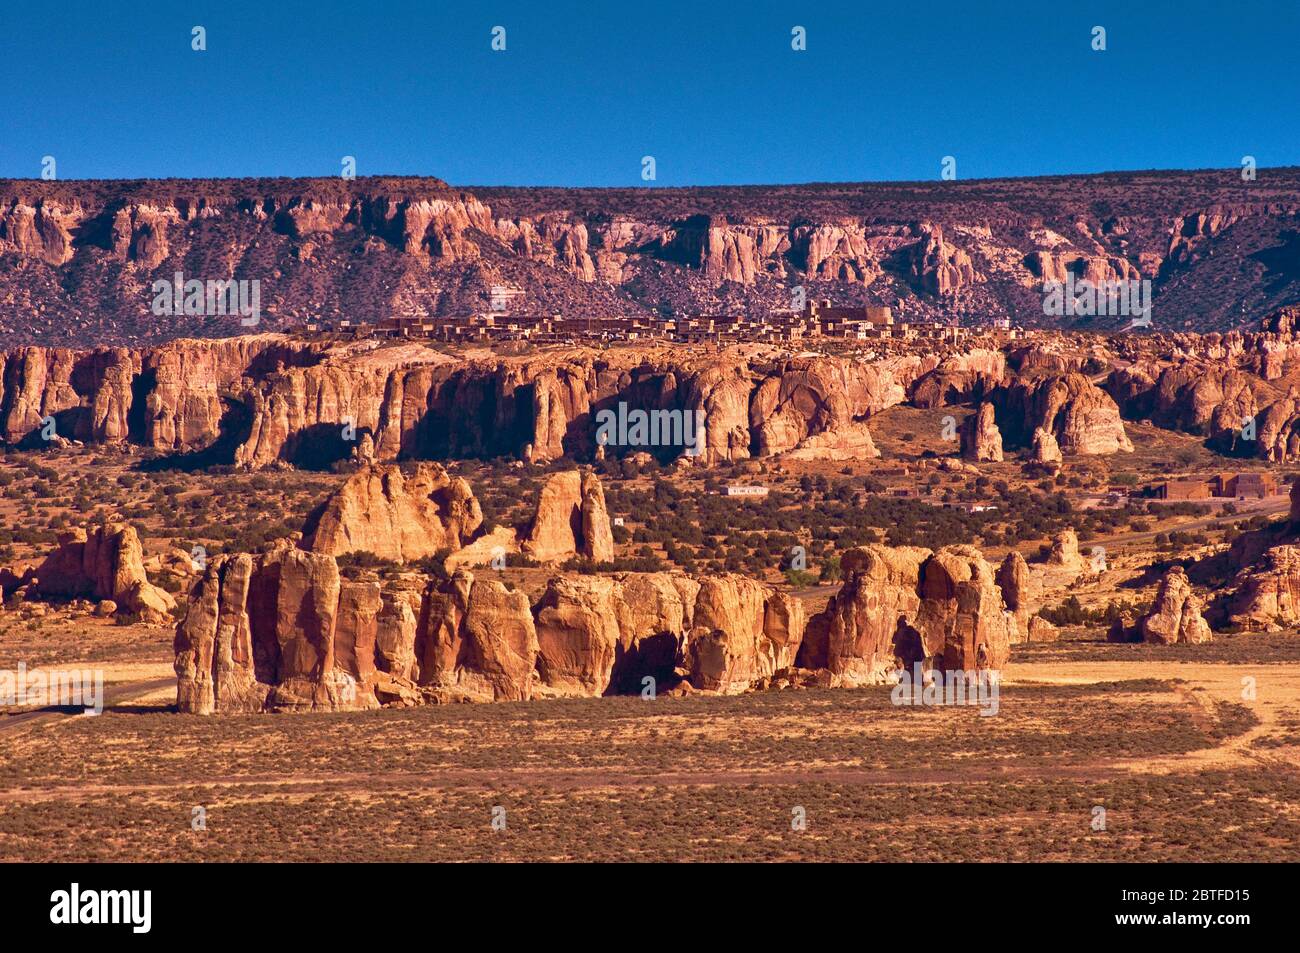 Acoma Pueblo (Sky City), Native American pueblo on top of a mesa in Acoma Indian Reservation, New Mexico, USA Stock Photo